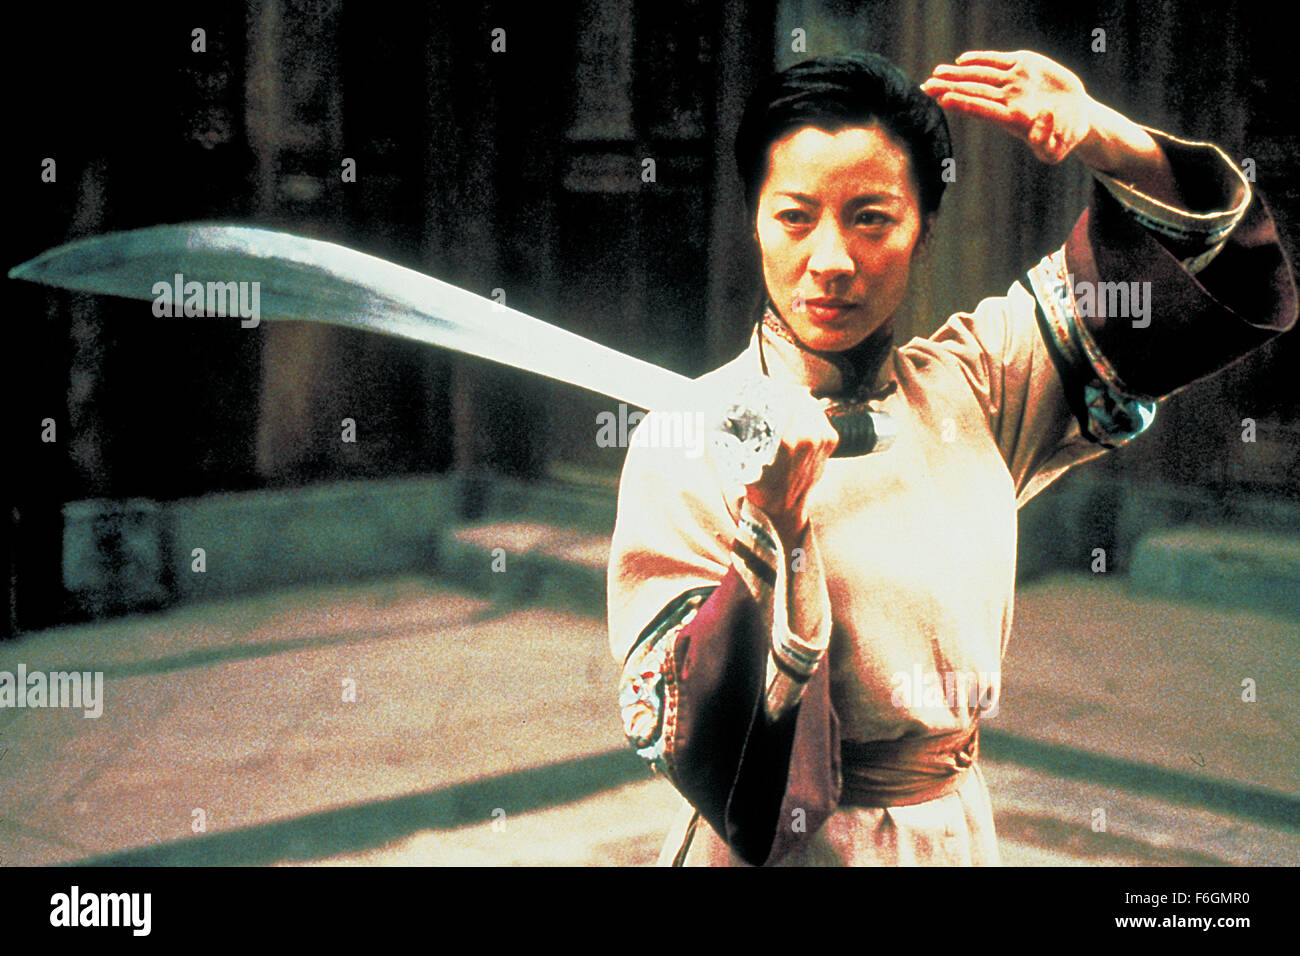 RELEASE DATE: December 22, 2000. MOVIE TITLE: Crouching Tiger Hidden Dragon. STUDIO: United China Vision. PLOT: The disappearance of a magical jade sword spurs a breathtaking quest for the missing treasure. Li is embittered by the loss of his jade sword, and his unrequited pursuit of Yu is further complicated by the mysterious intrusion of an assassin. The identity of the assassin is gradually unveiled as another poignant tale of love begins to ravel with that of Li and Yu against the backdrop of Western China's magnificent landscape. PICTURED: MICHELLE YEOH as Yu Shu Lien. Stock Photo